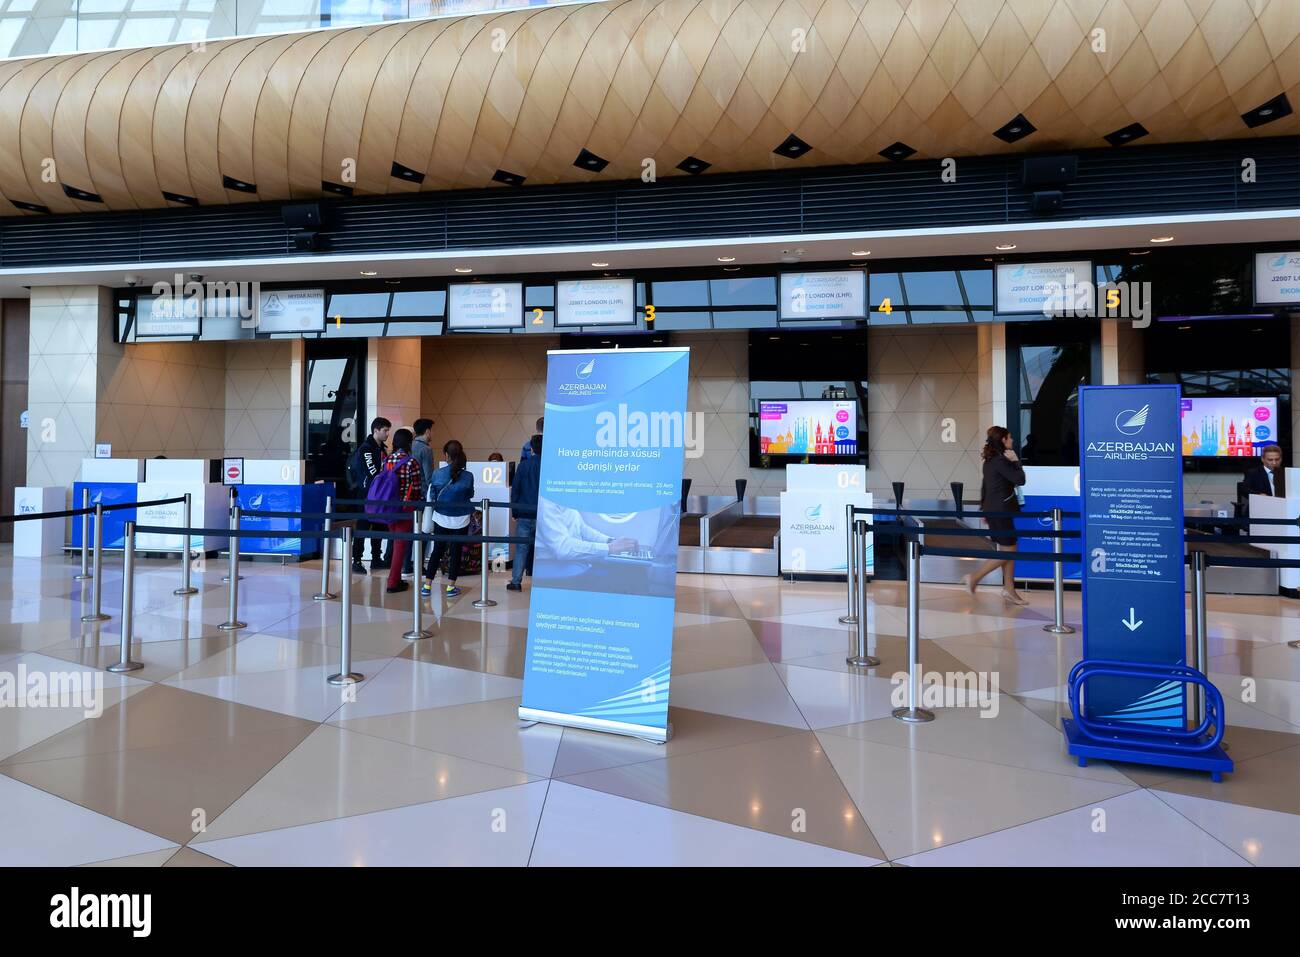 Check-in area of Azerbaijan Airlines flight to London in Baku Airport. Interior view of Heydar Aliyev International Airport in Azerbaijan. Stock Photo